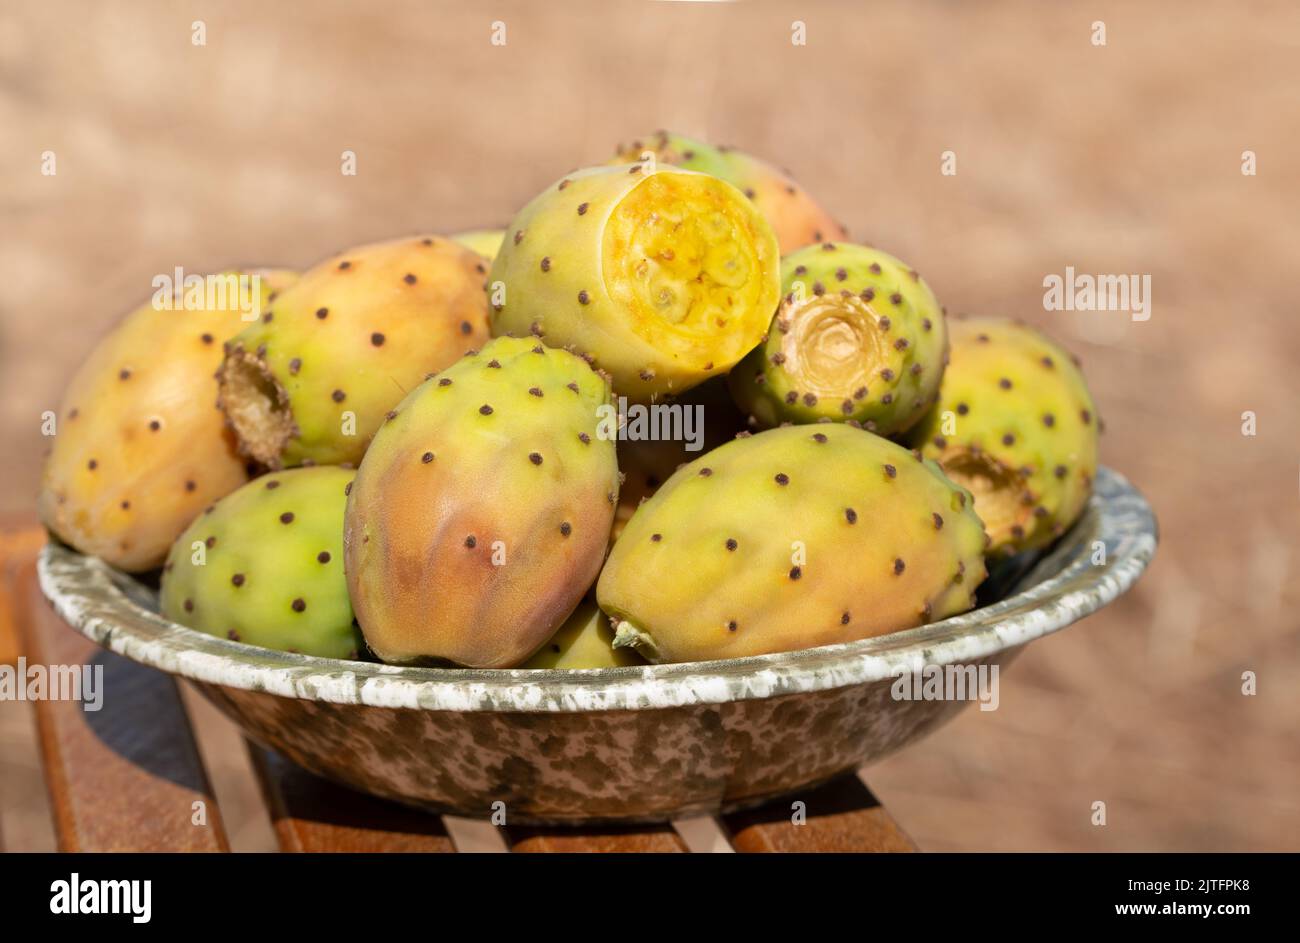 Several ripe prickly pear fruits lie in a ceramic bowl. The bowl stands on a base made of rustic wood. Stock Photo